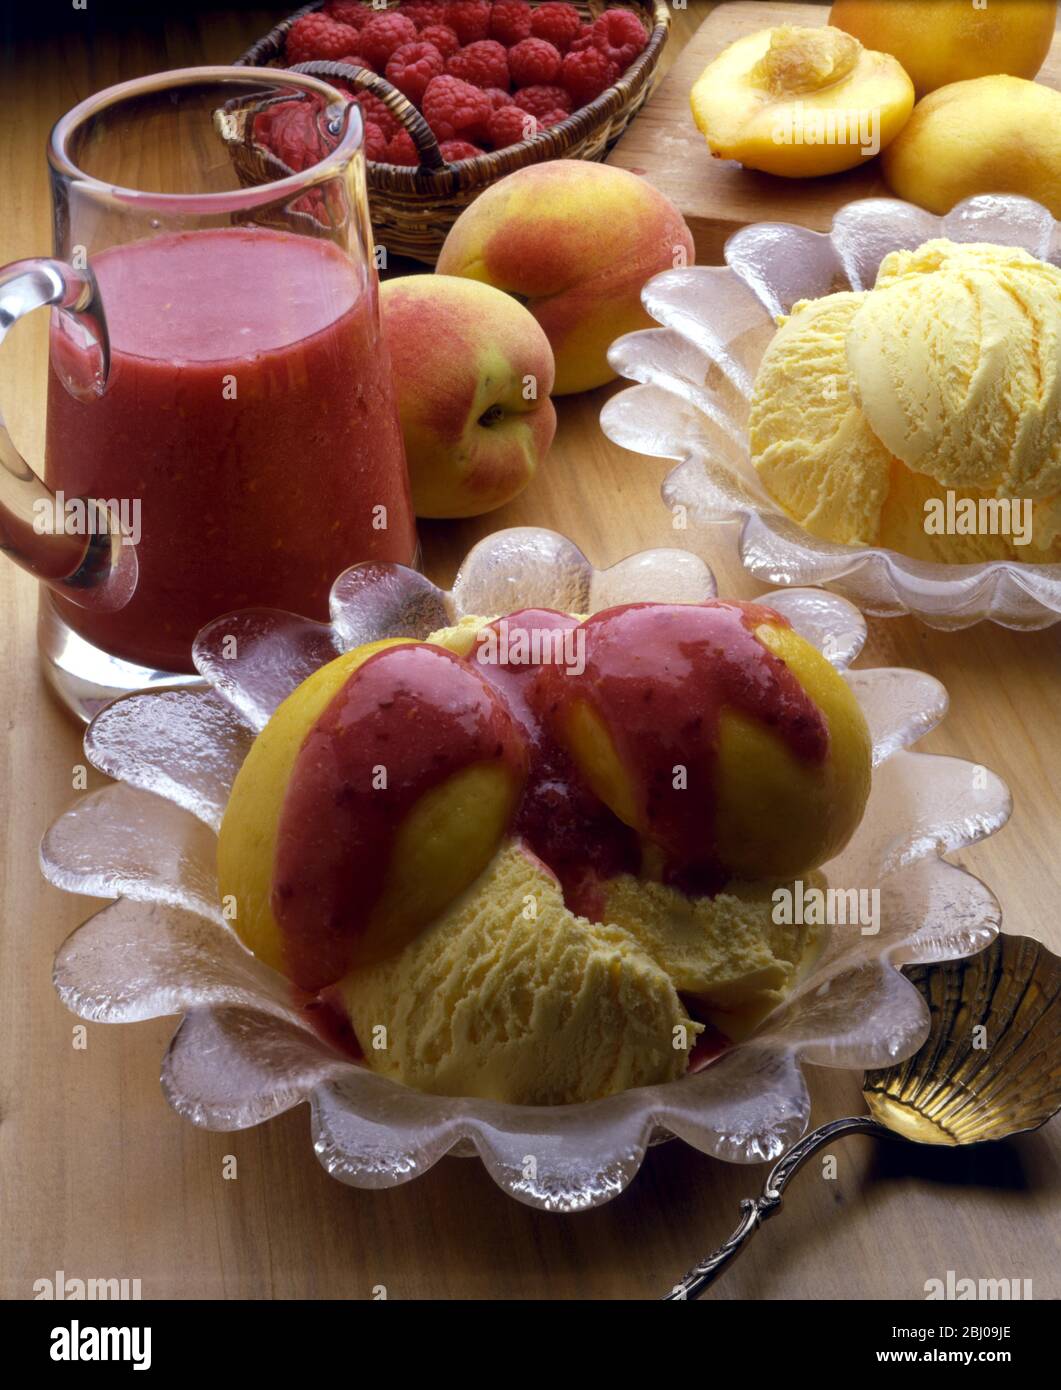 Peach Melba - Peach Melba was created by Auguste Escoffier at the Savoy Hotel in London for Dame Nellie Melba who was living there for a time. Stock Photo